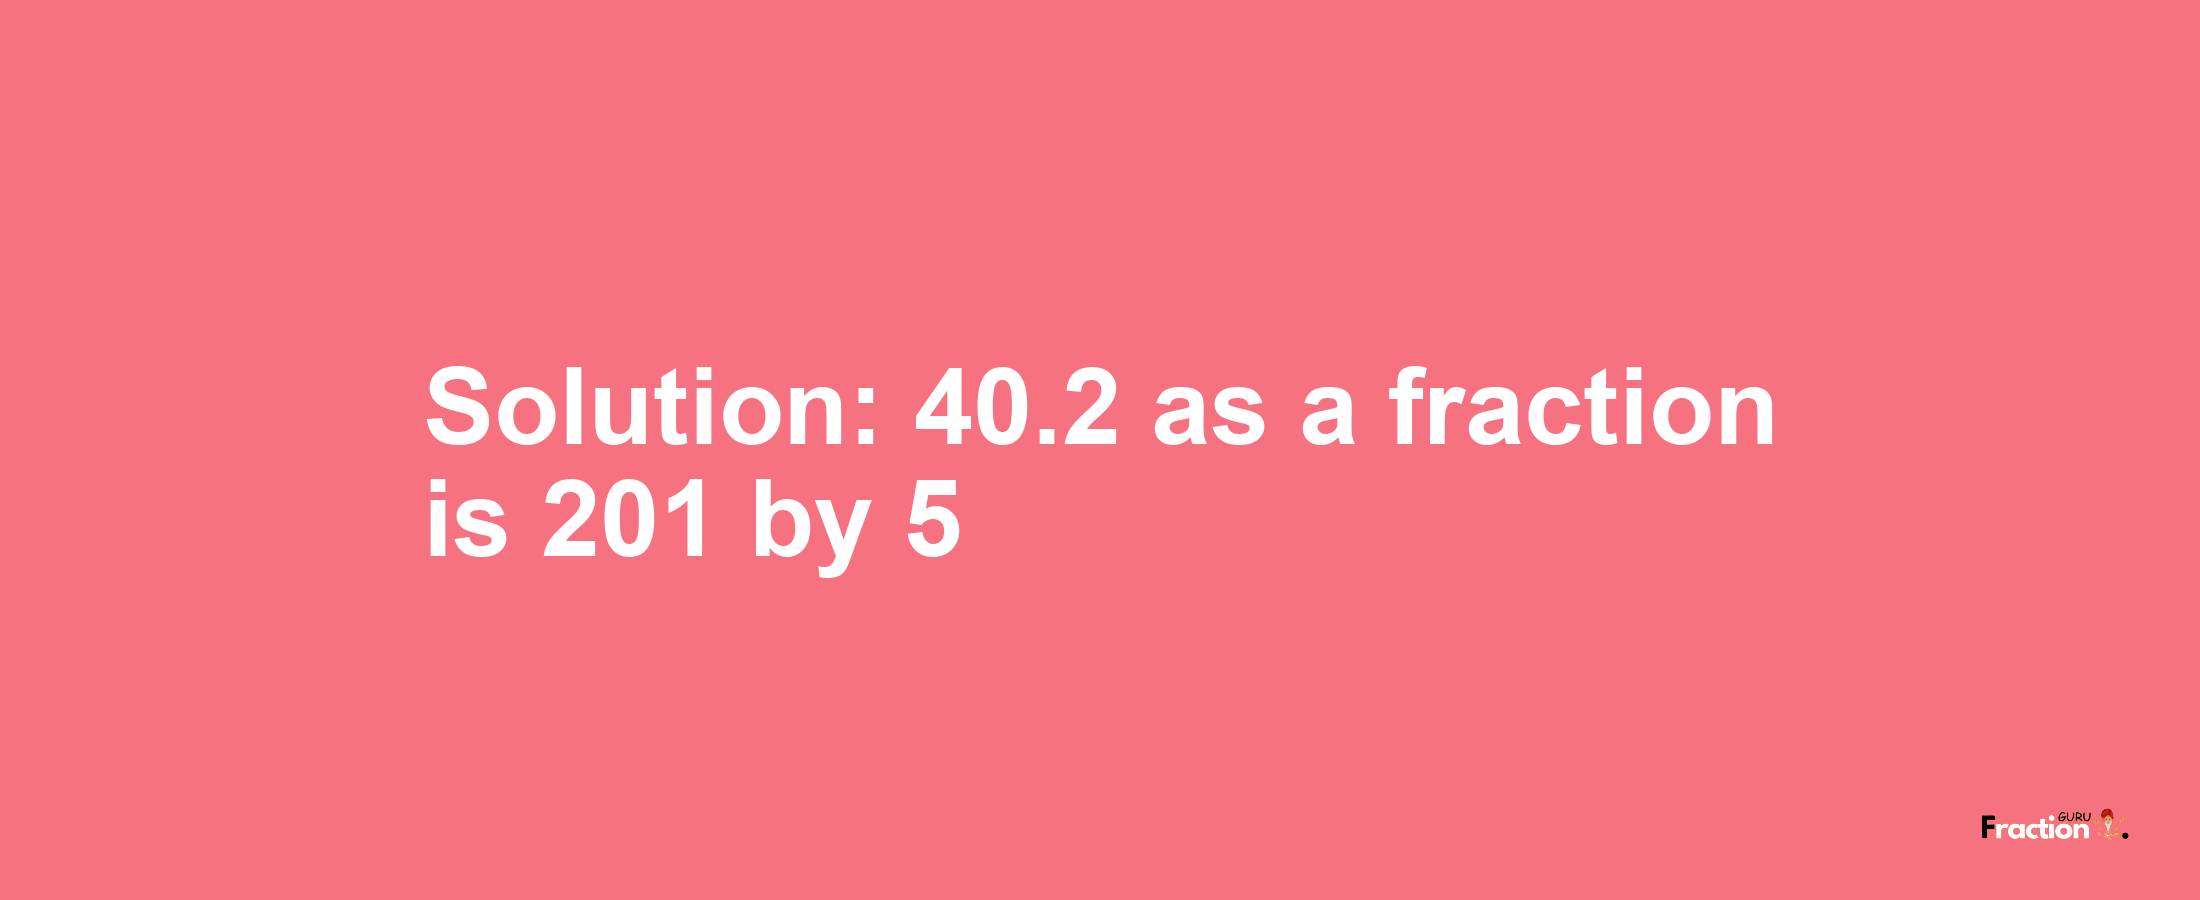 Solution:40.2 as a fraction is 201/5